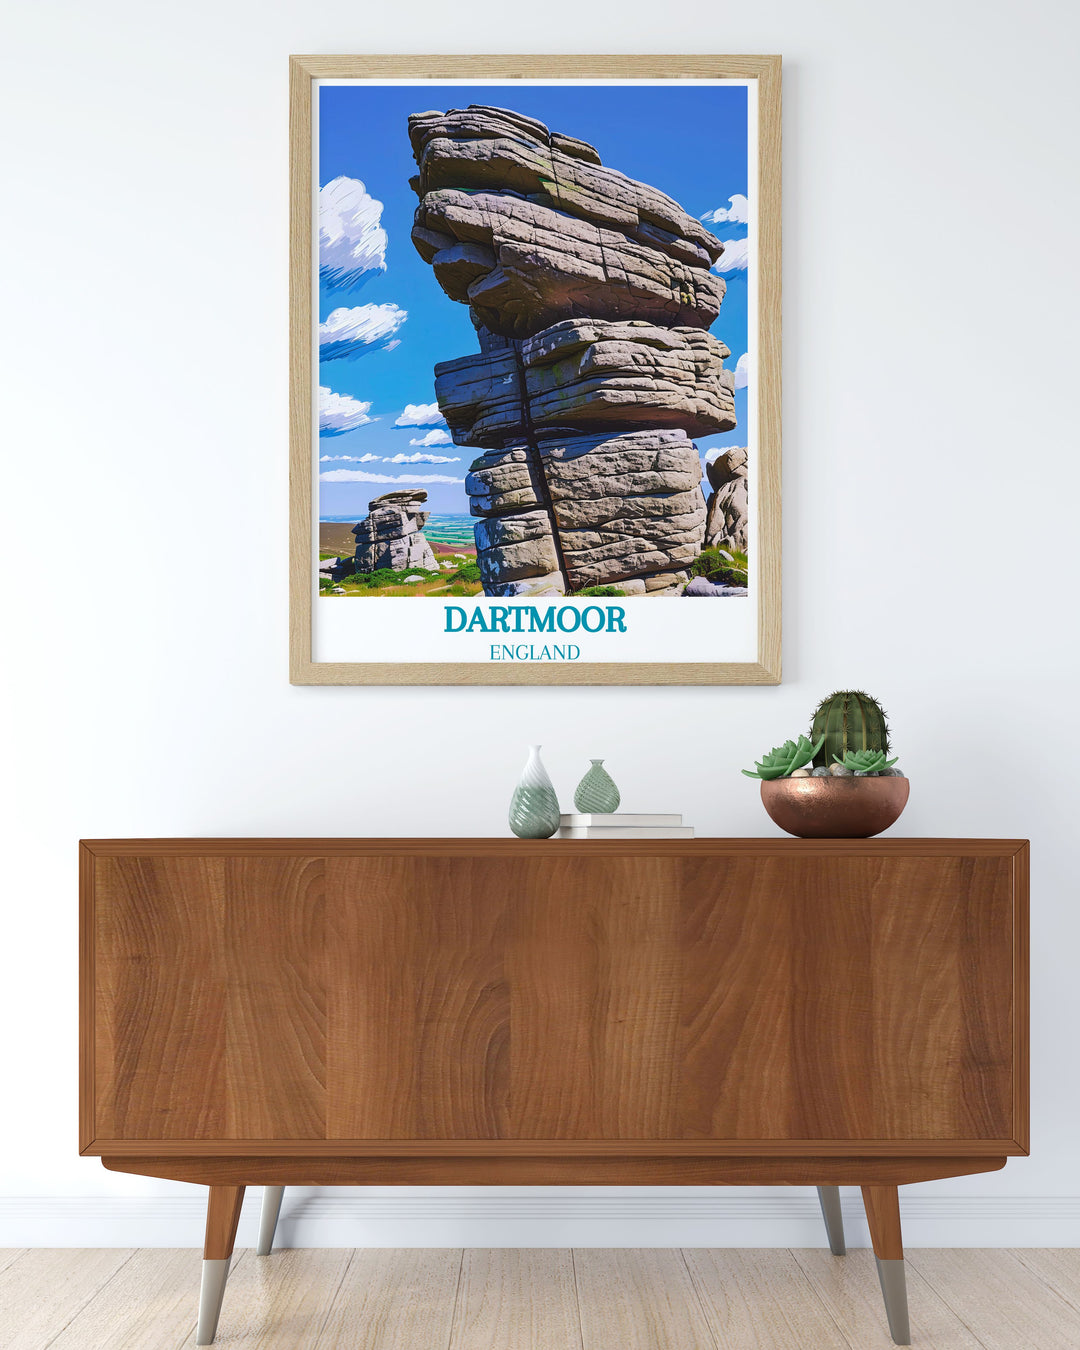 Framed art showcasing the striking formations of the tors and the wild beauty of Dartmoor, ideal for enhancing any room with the charm of the English countryside.